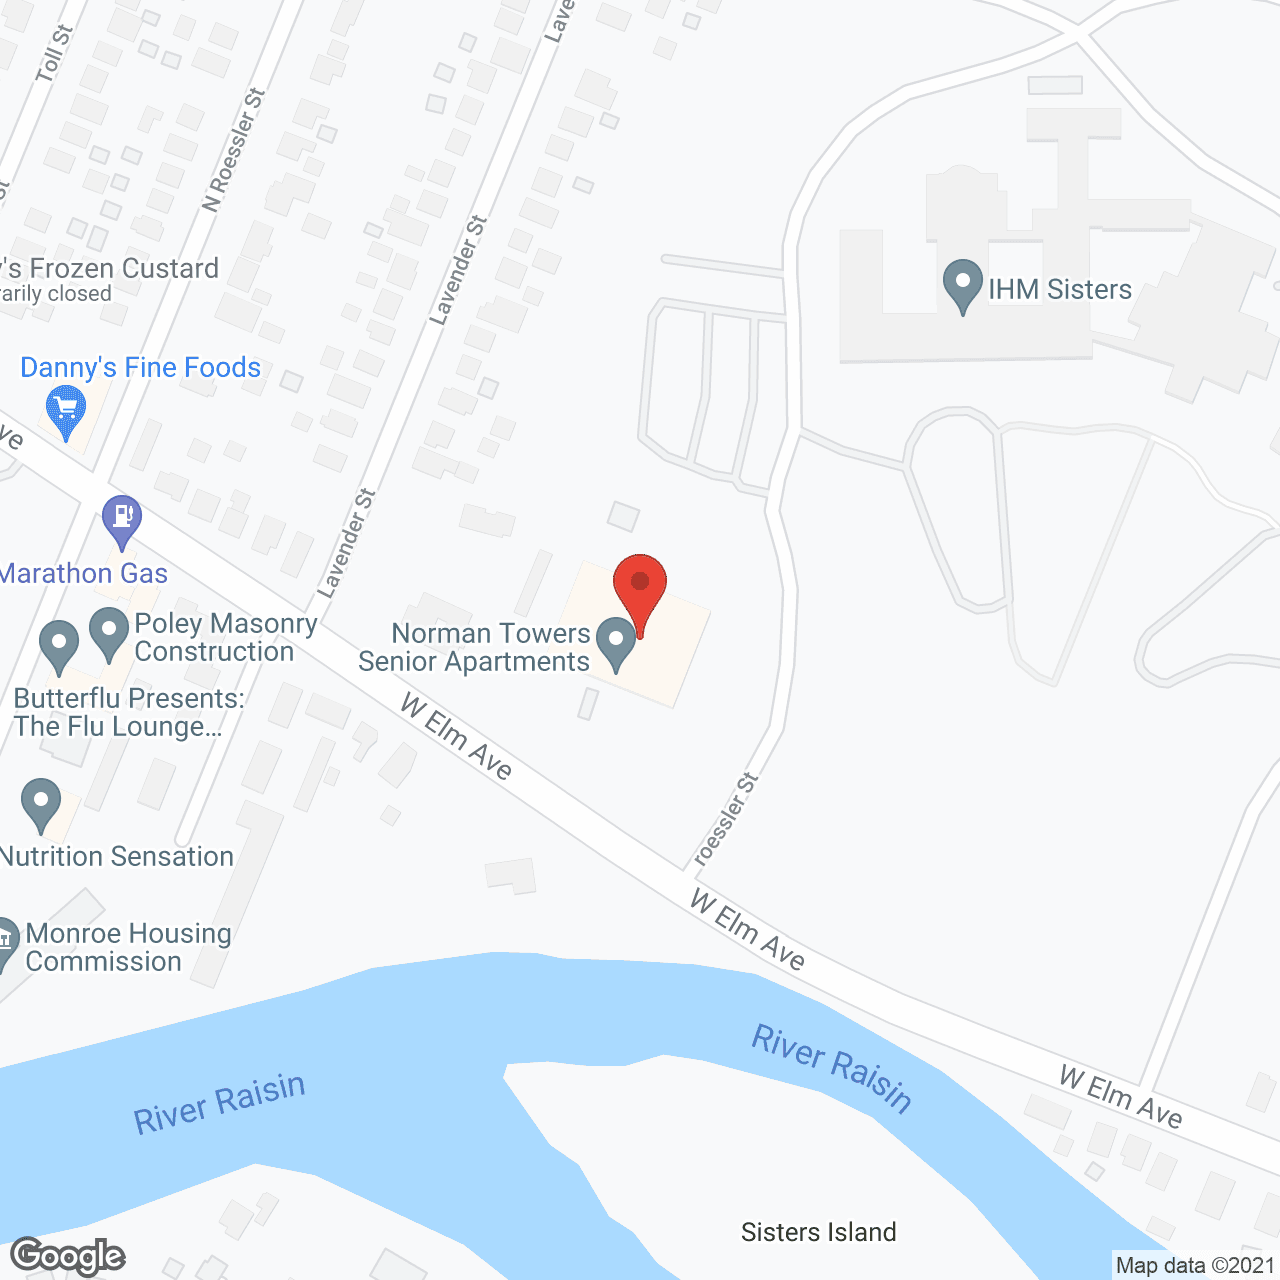 Norman Towers Retirement Residence LLC in google map